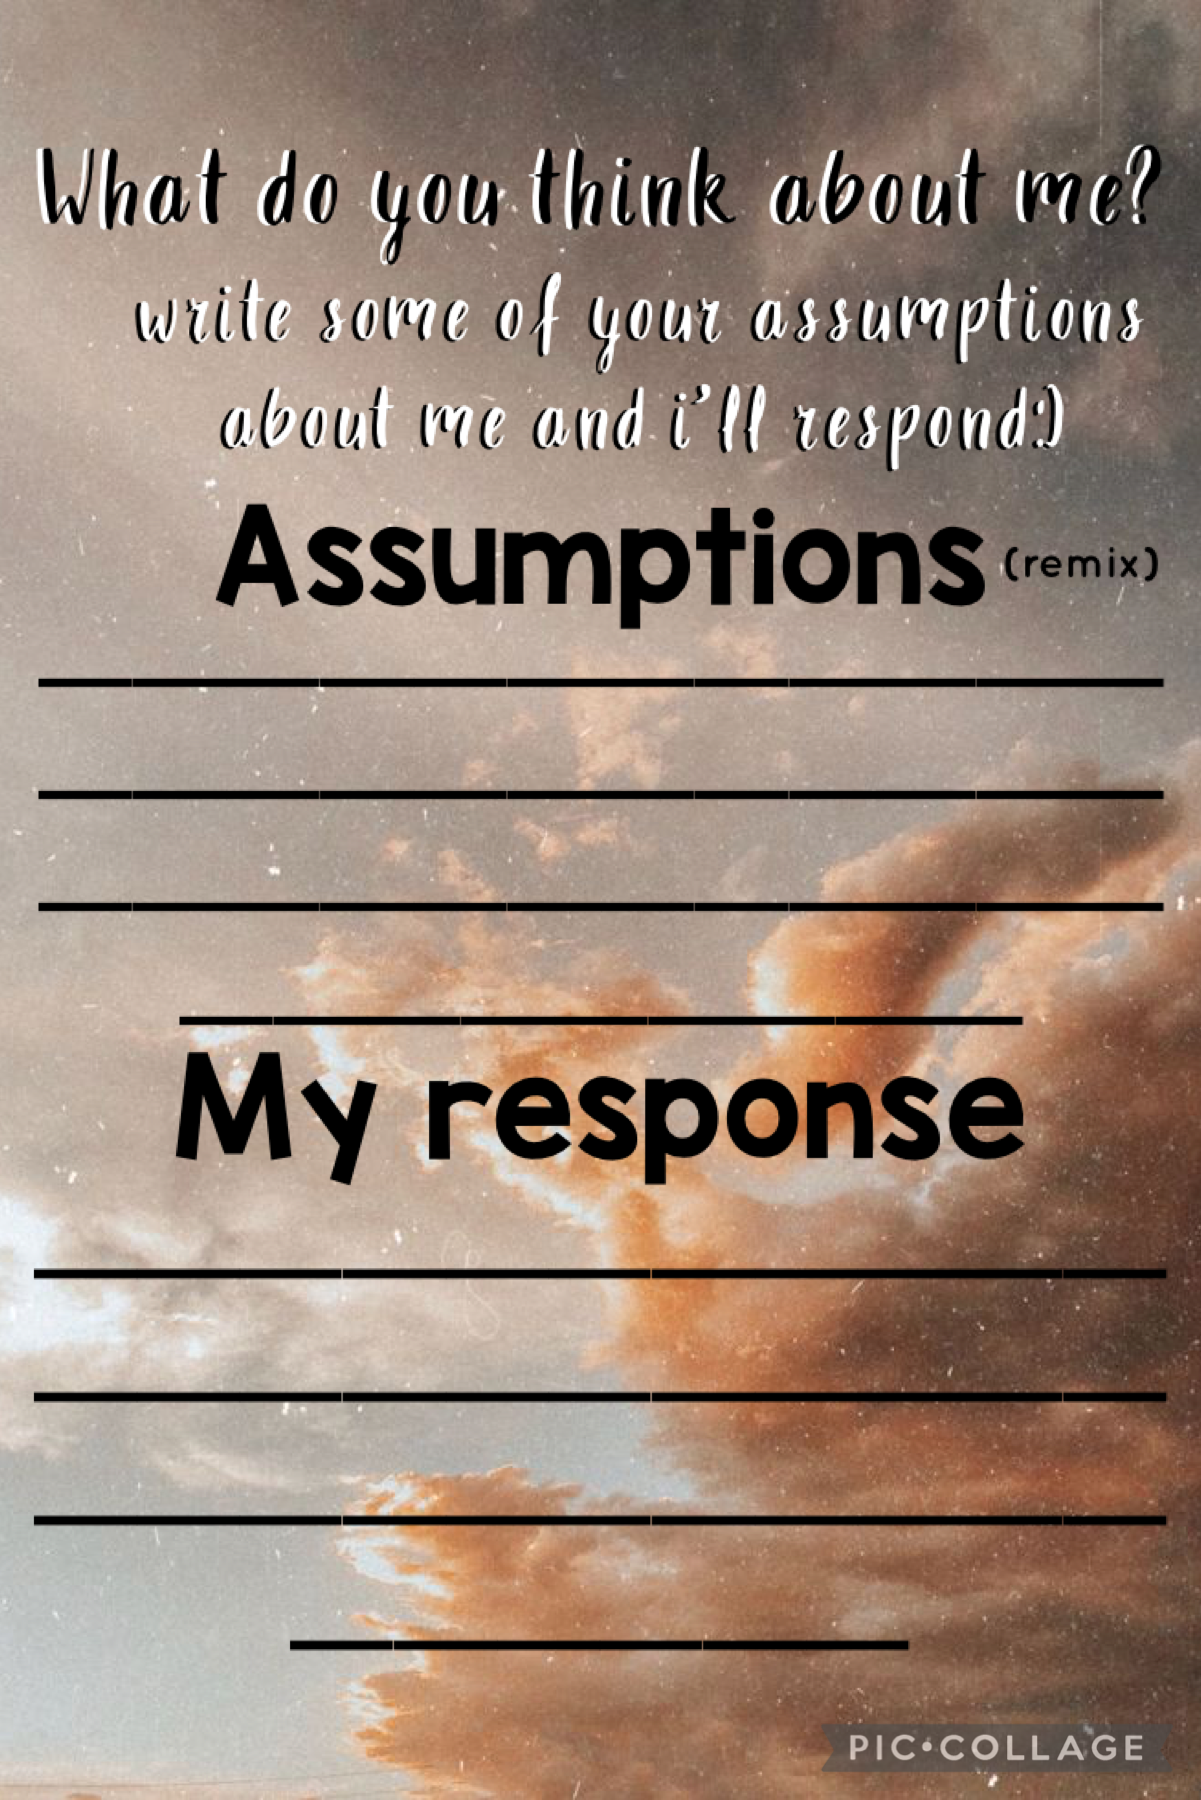 tap🌪

write your assumptions you have abt me and i’ll respond!!